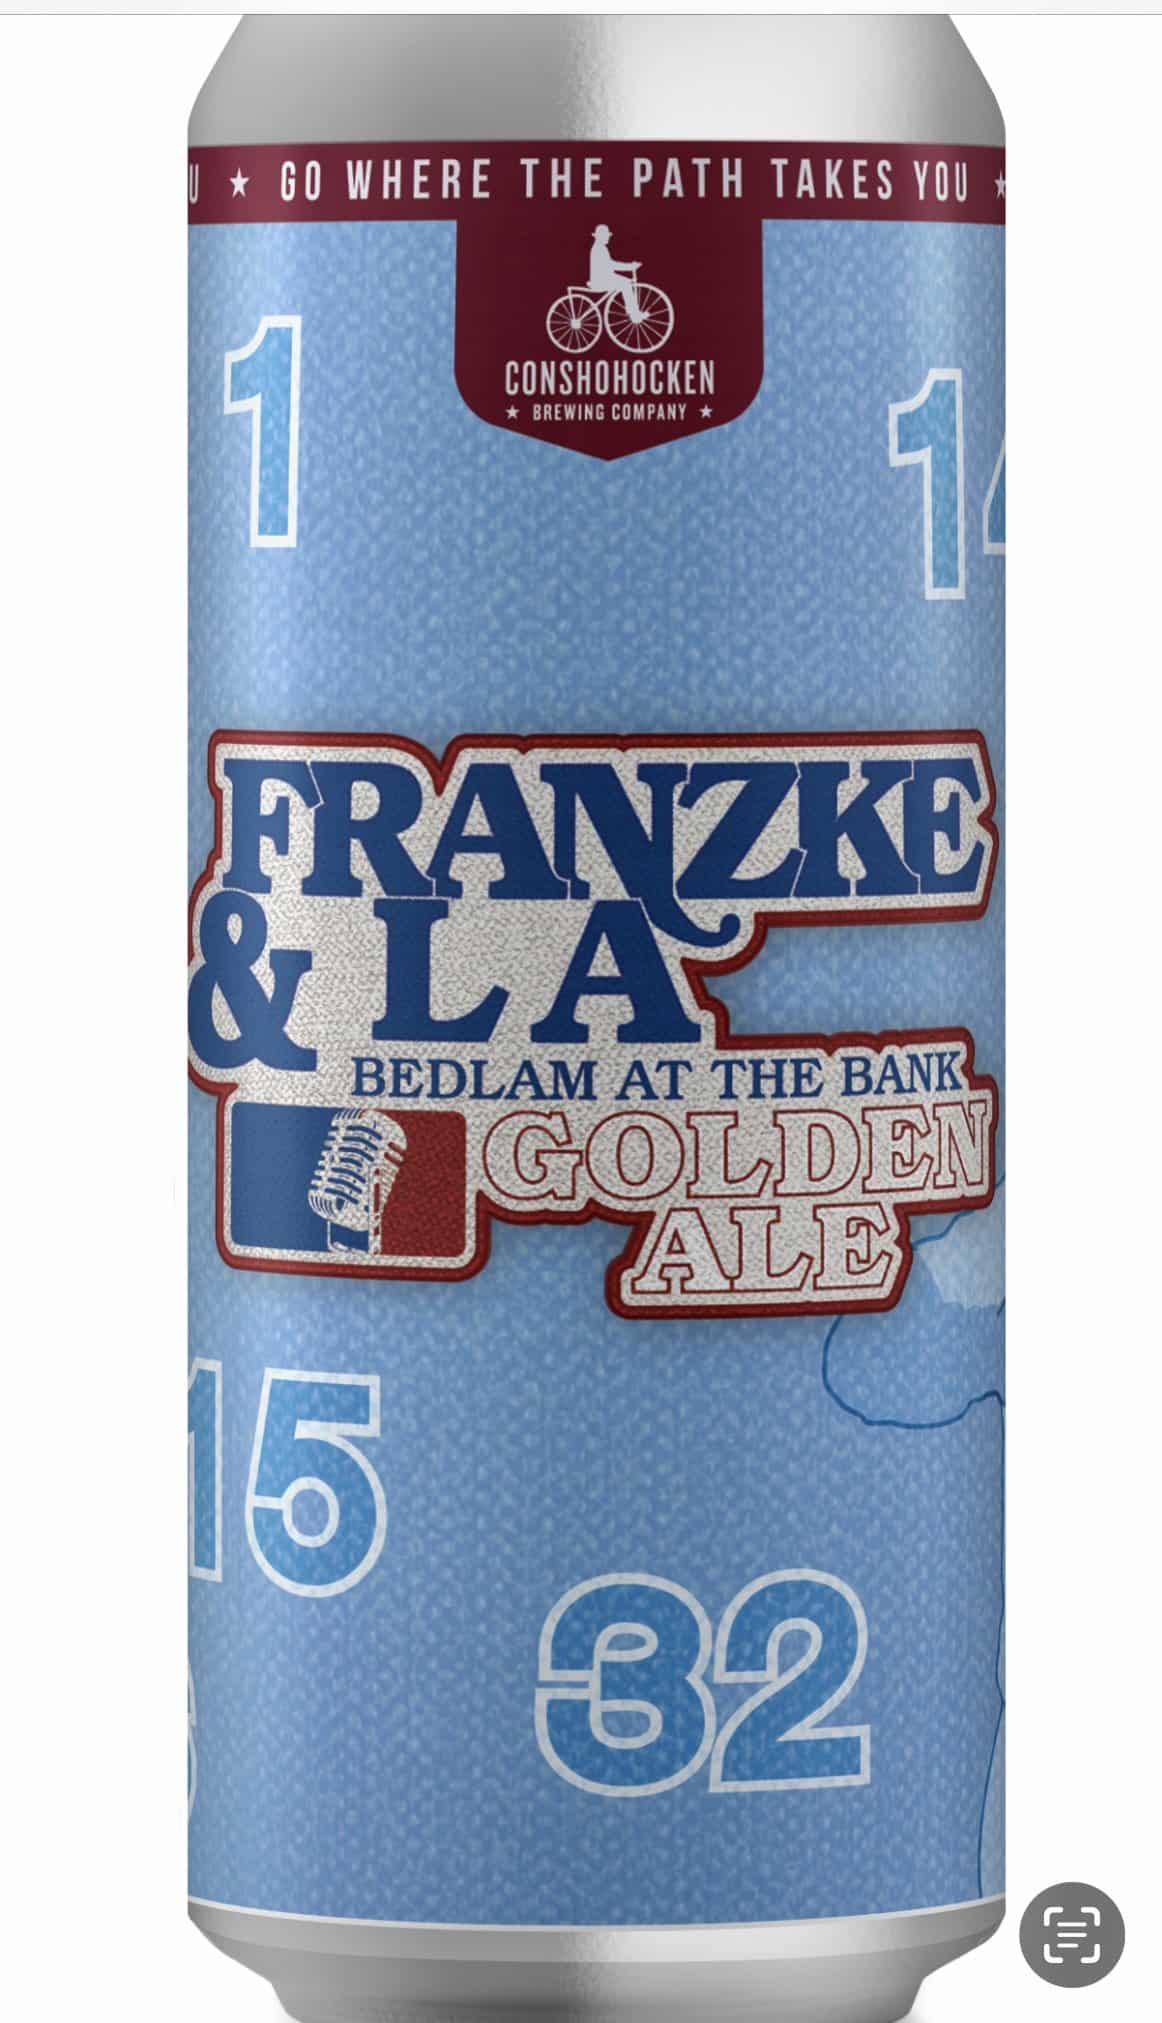 Conshohocken Doing a Charity Beer for Franzke and LA